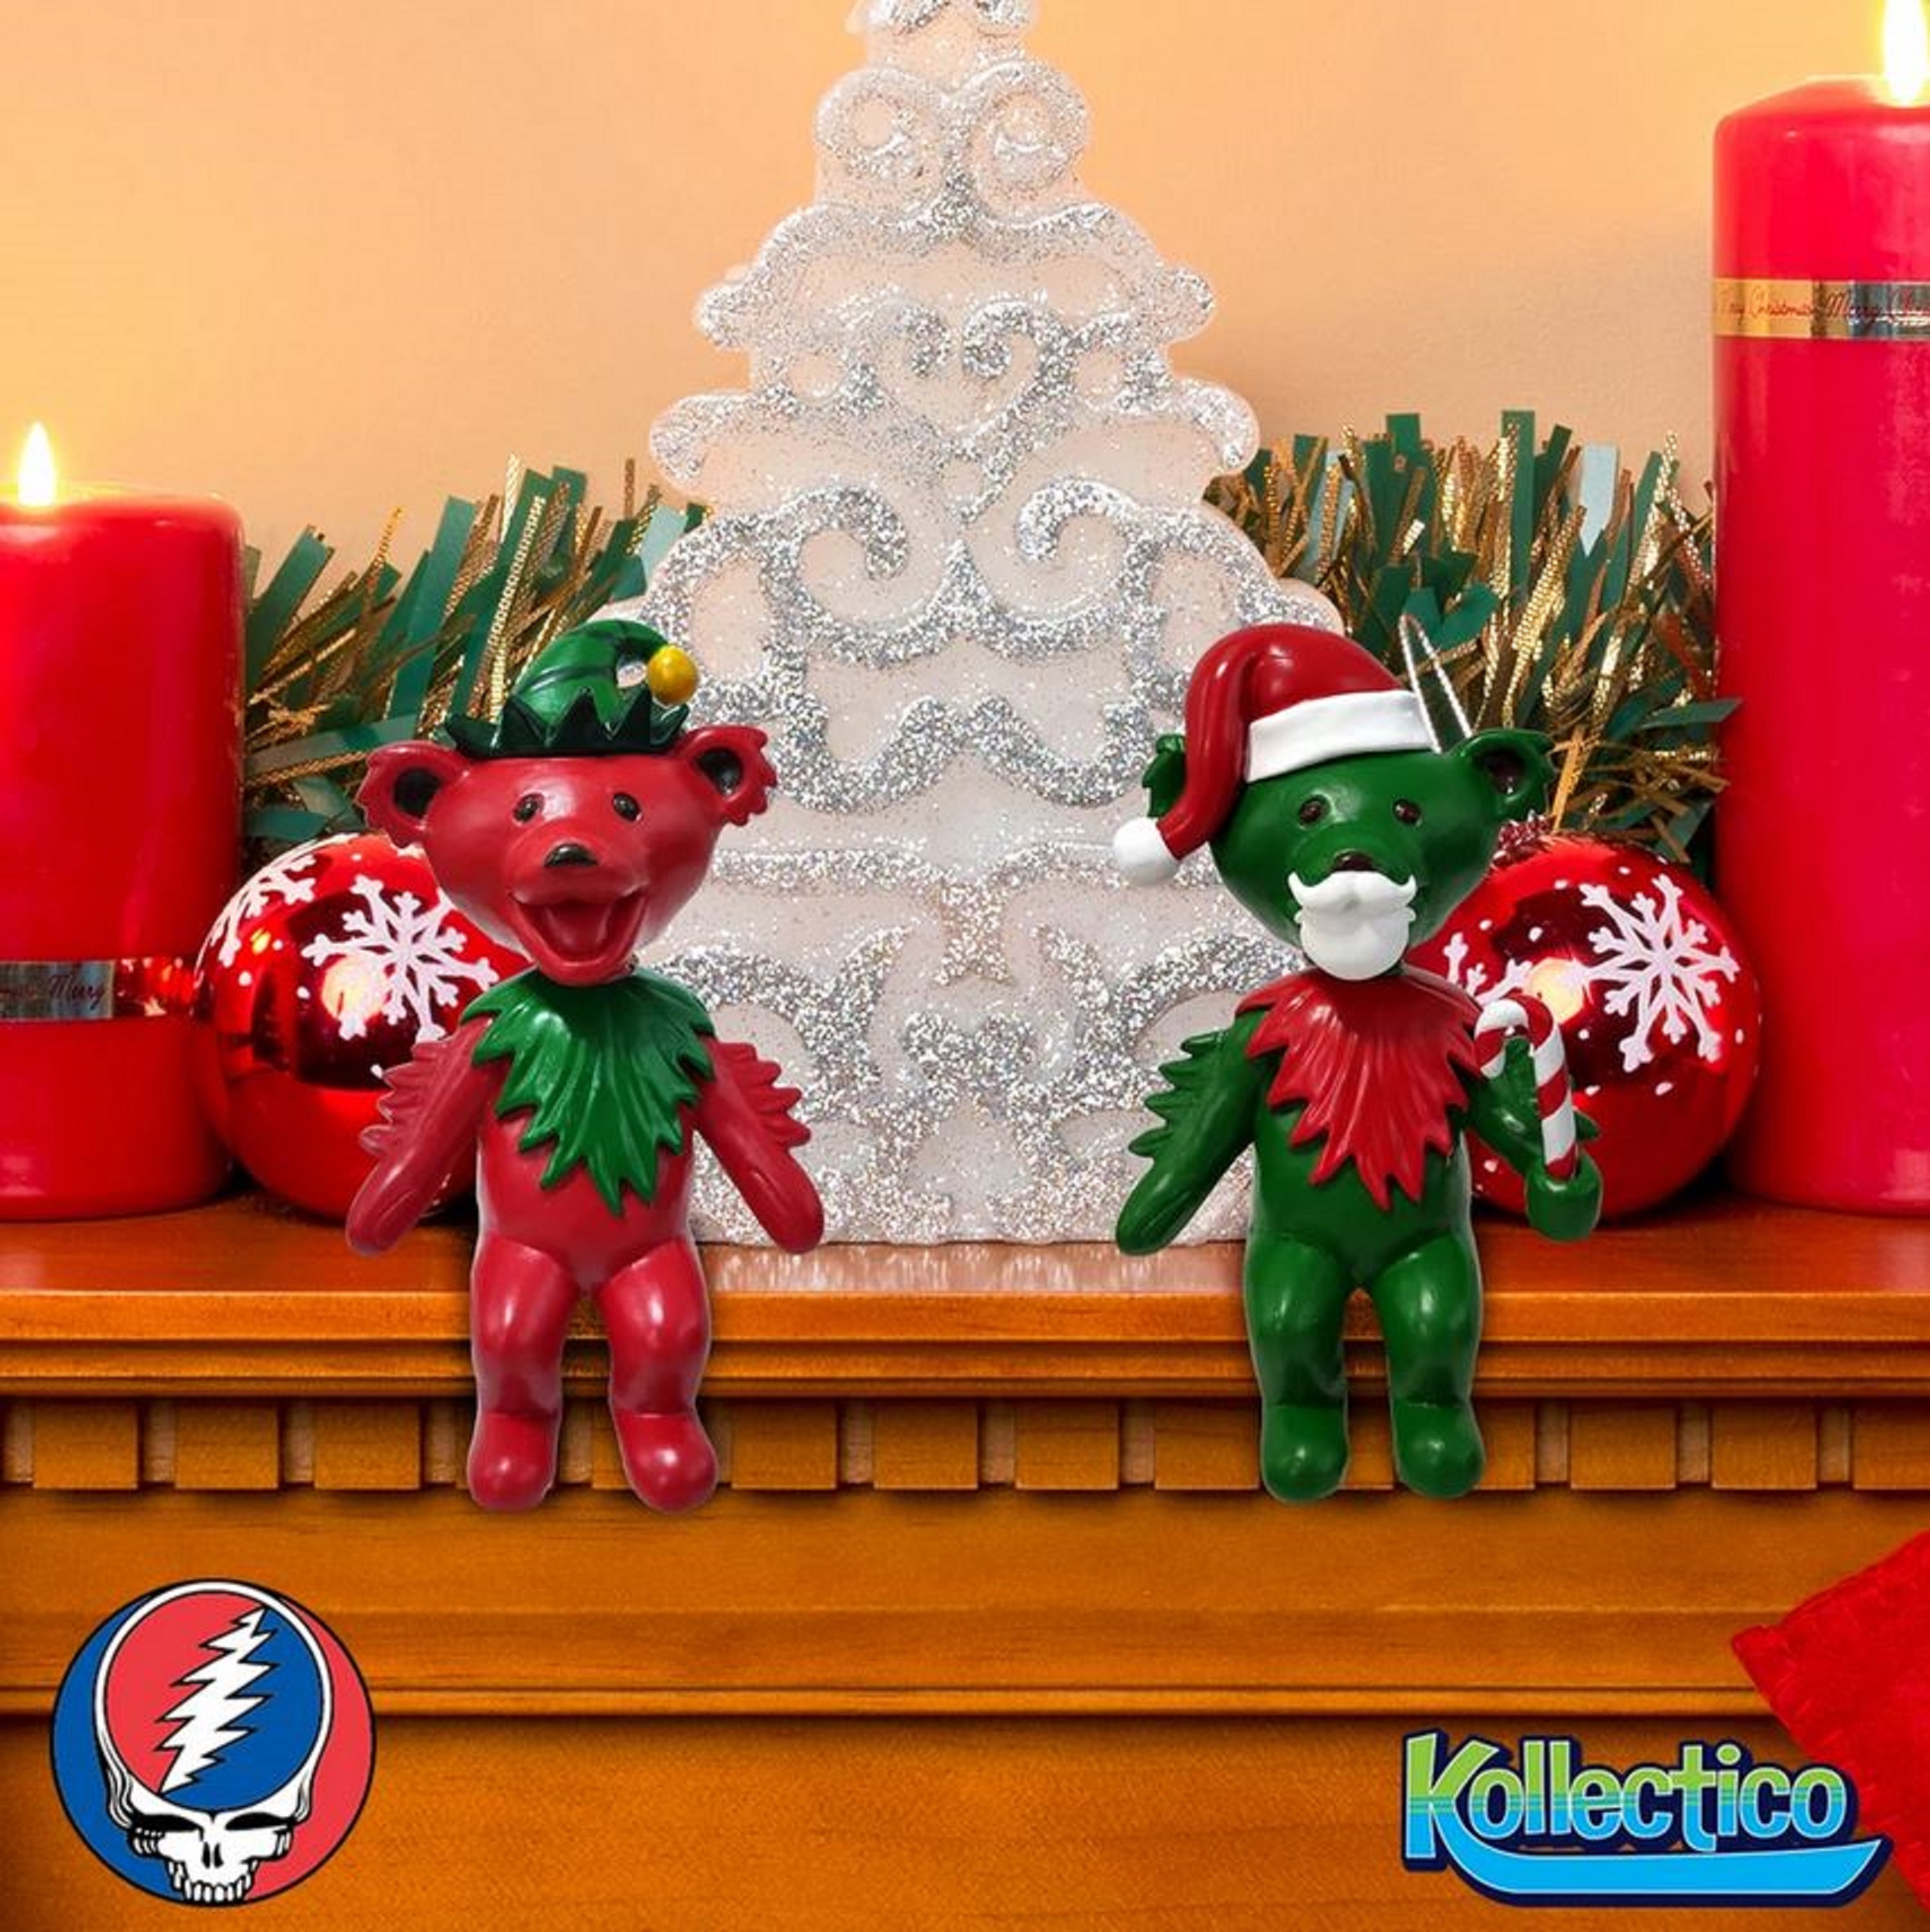 Light Up the Holidays Grateful Dead Collectibles